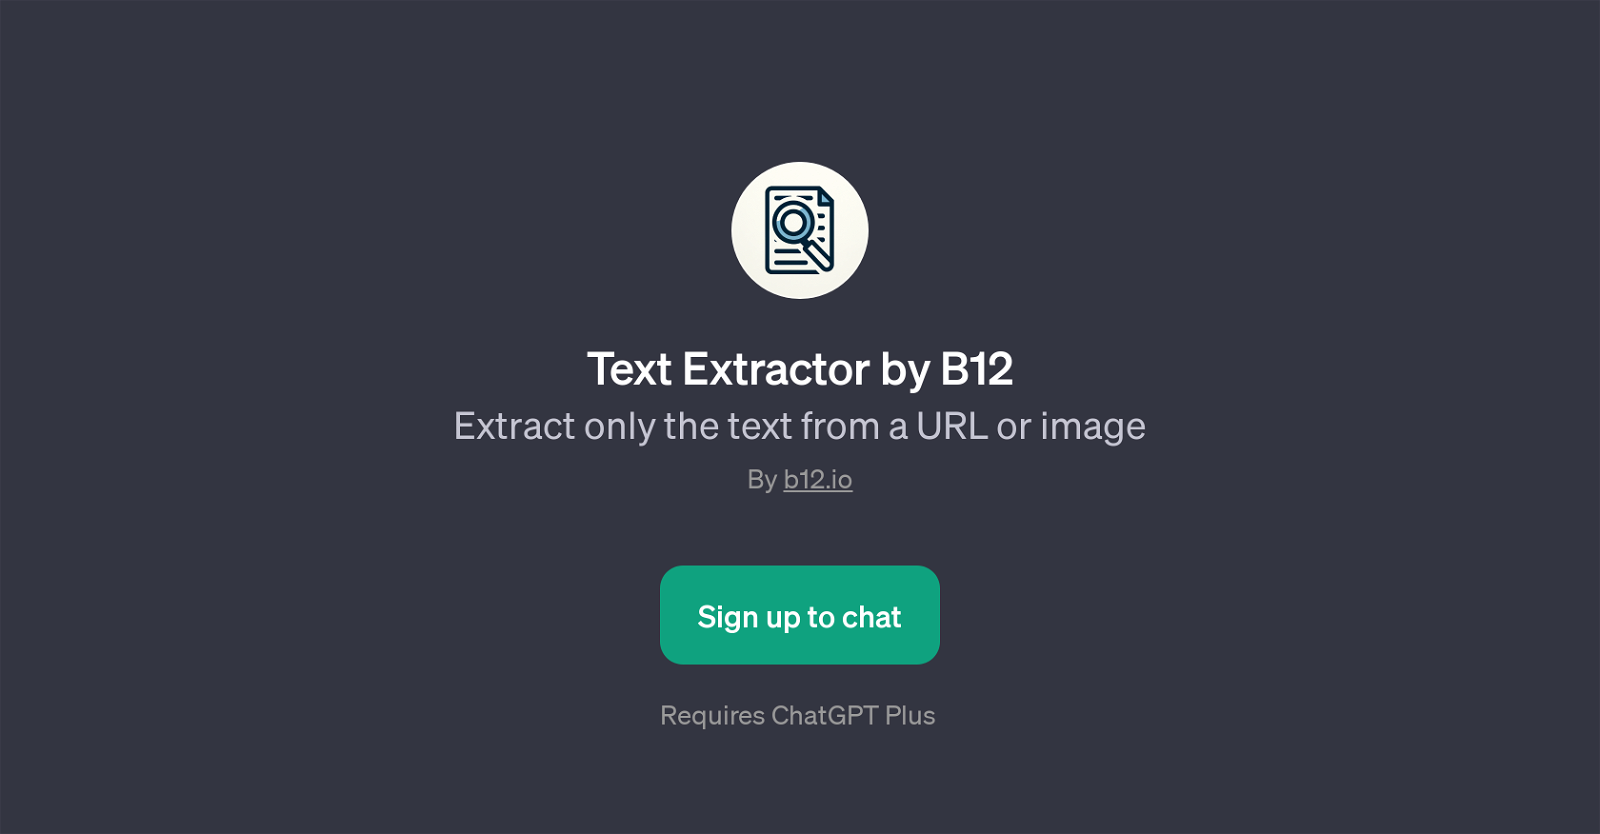 Text Extractor by B12 website